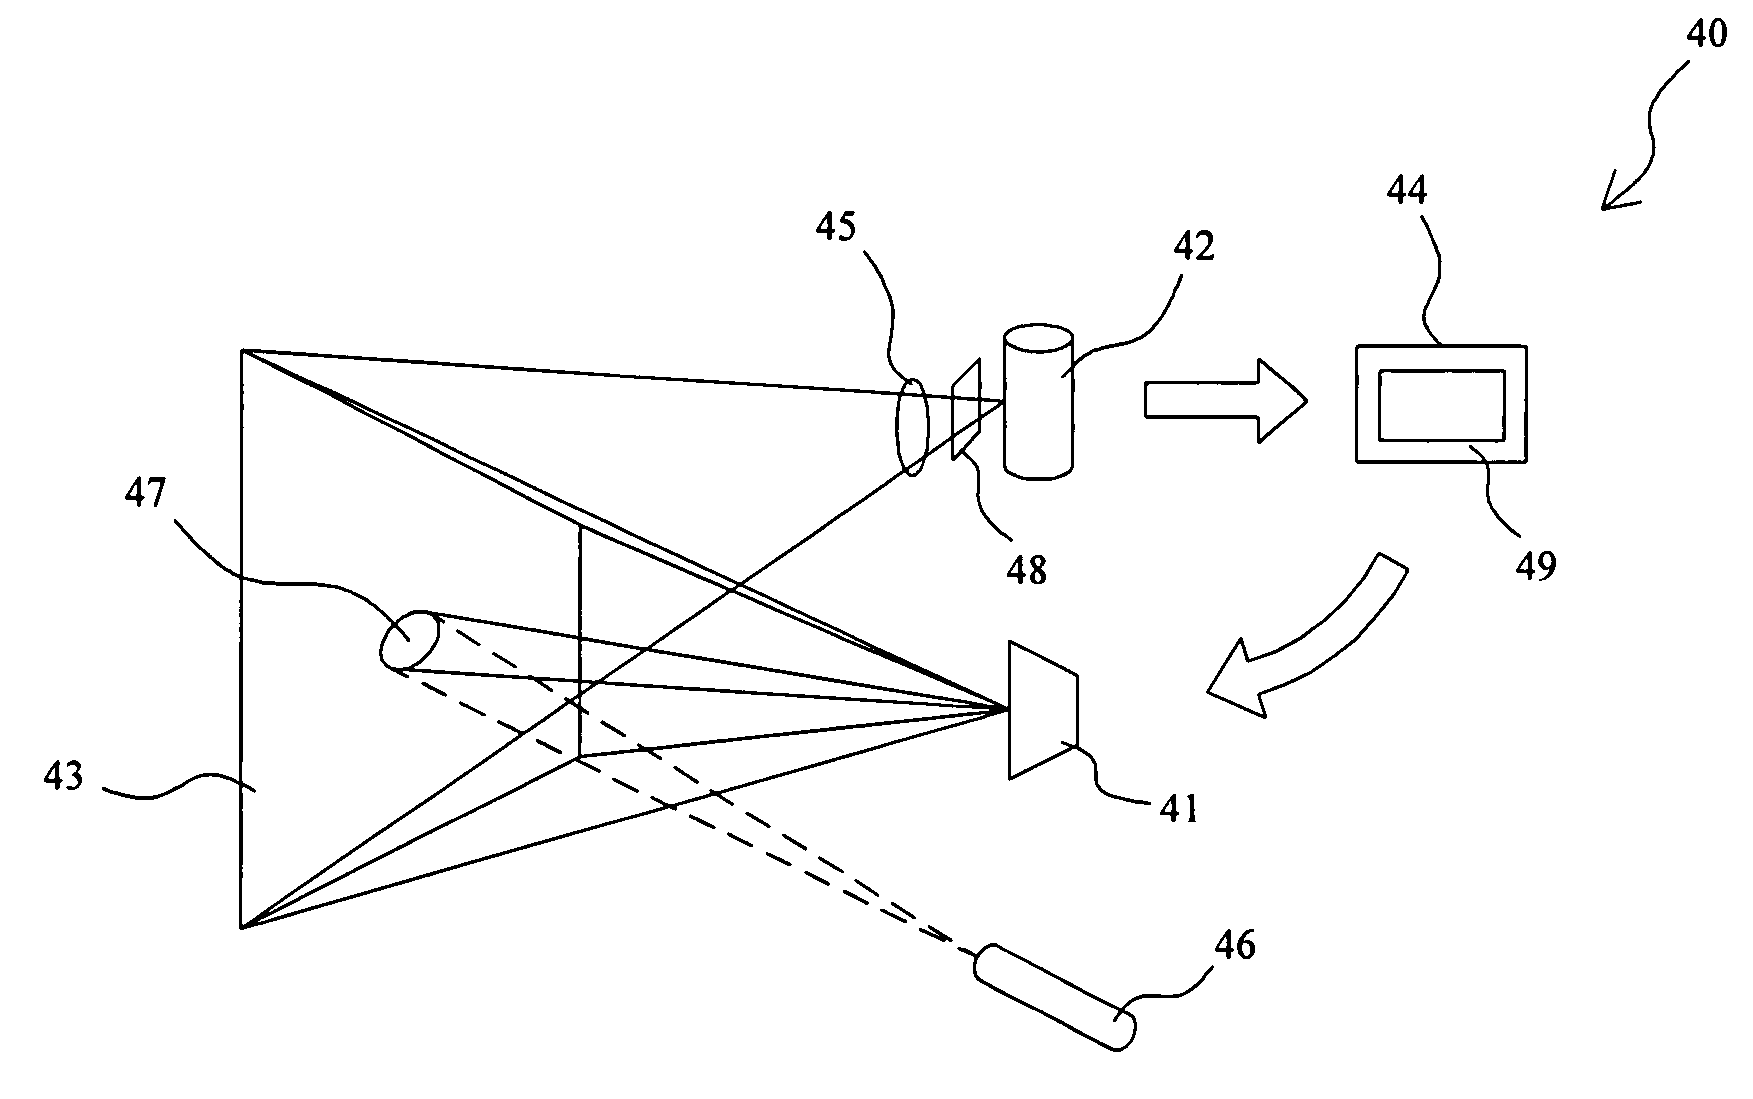 Pointing input system and method using one or more array sensors